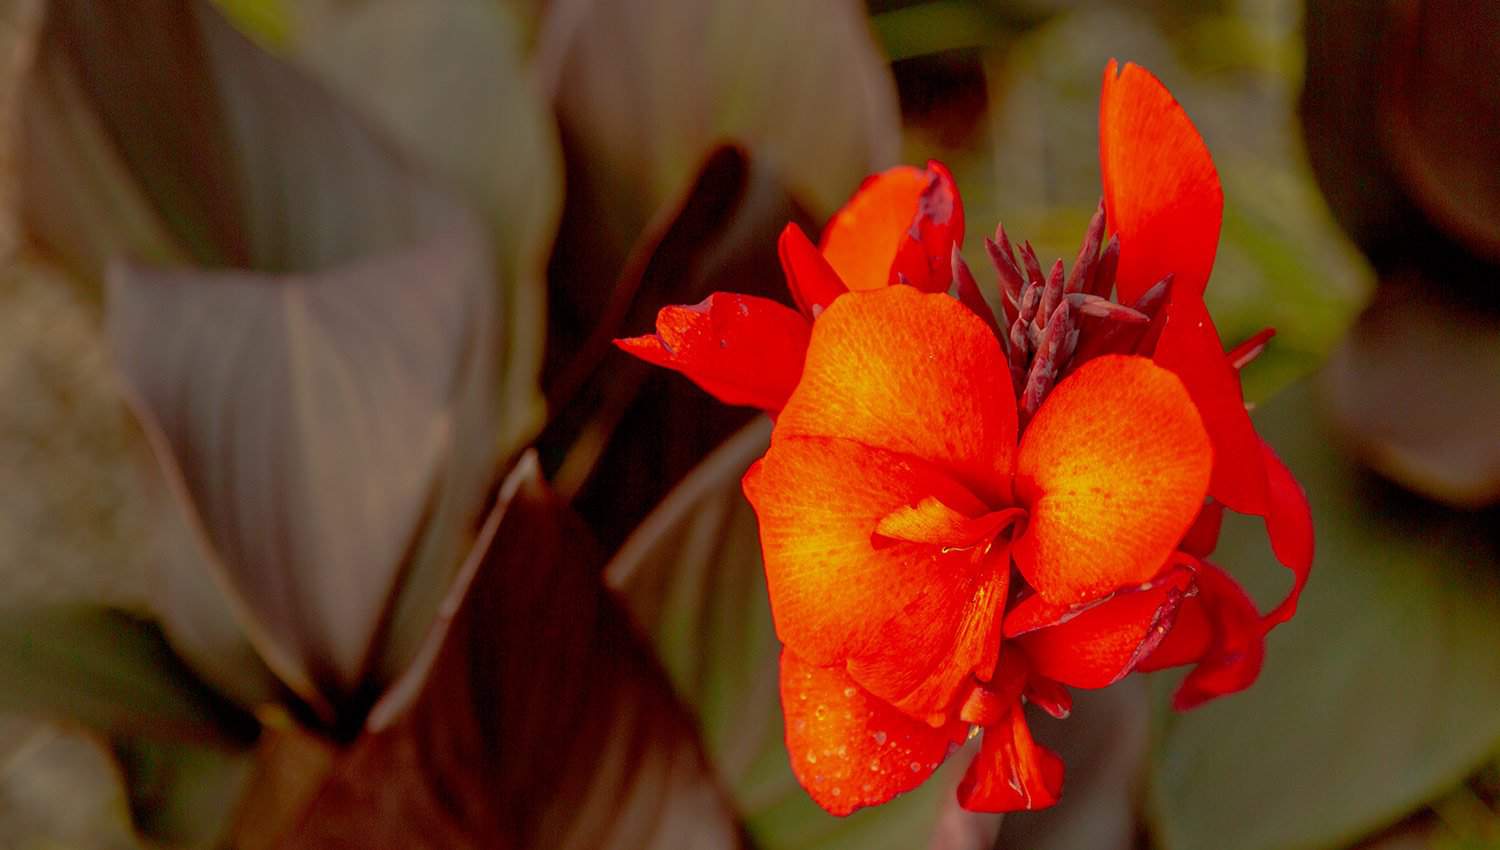 Bright orange-red blossoms above bronze-red leaves of Bronze-Scarlet Canna Lily